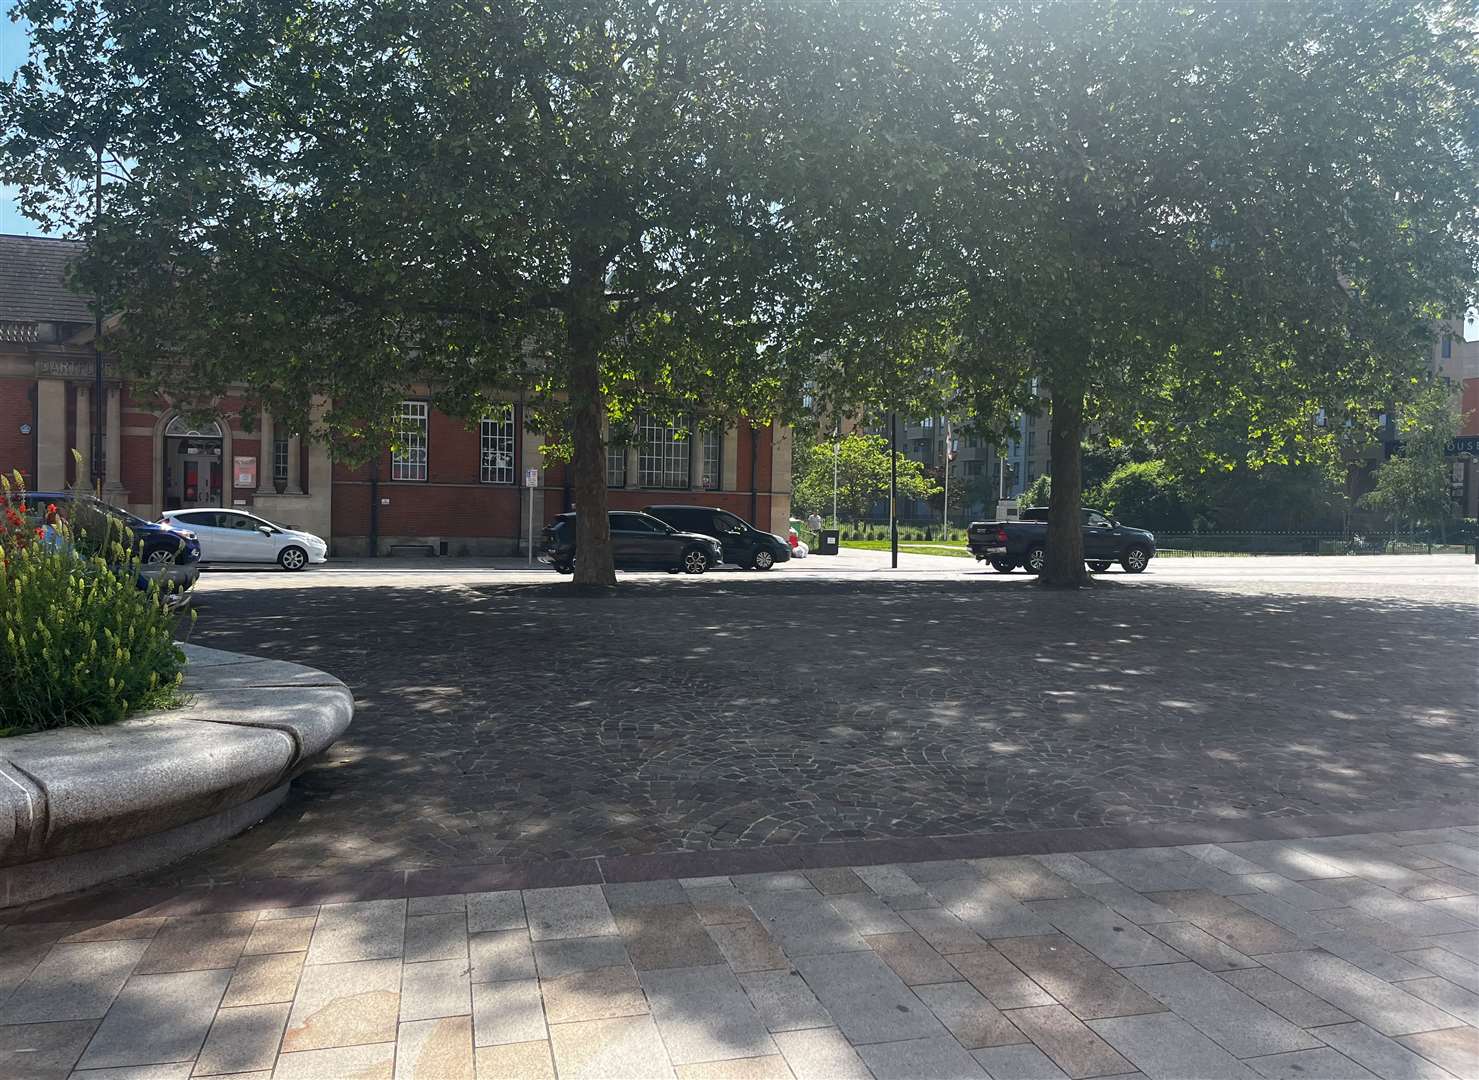 There are areas to sit in the shade along Market Street, Dartford